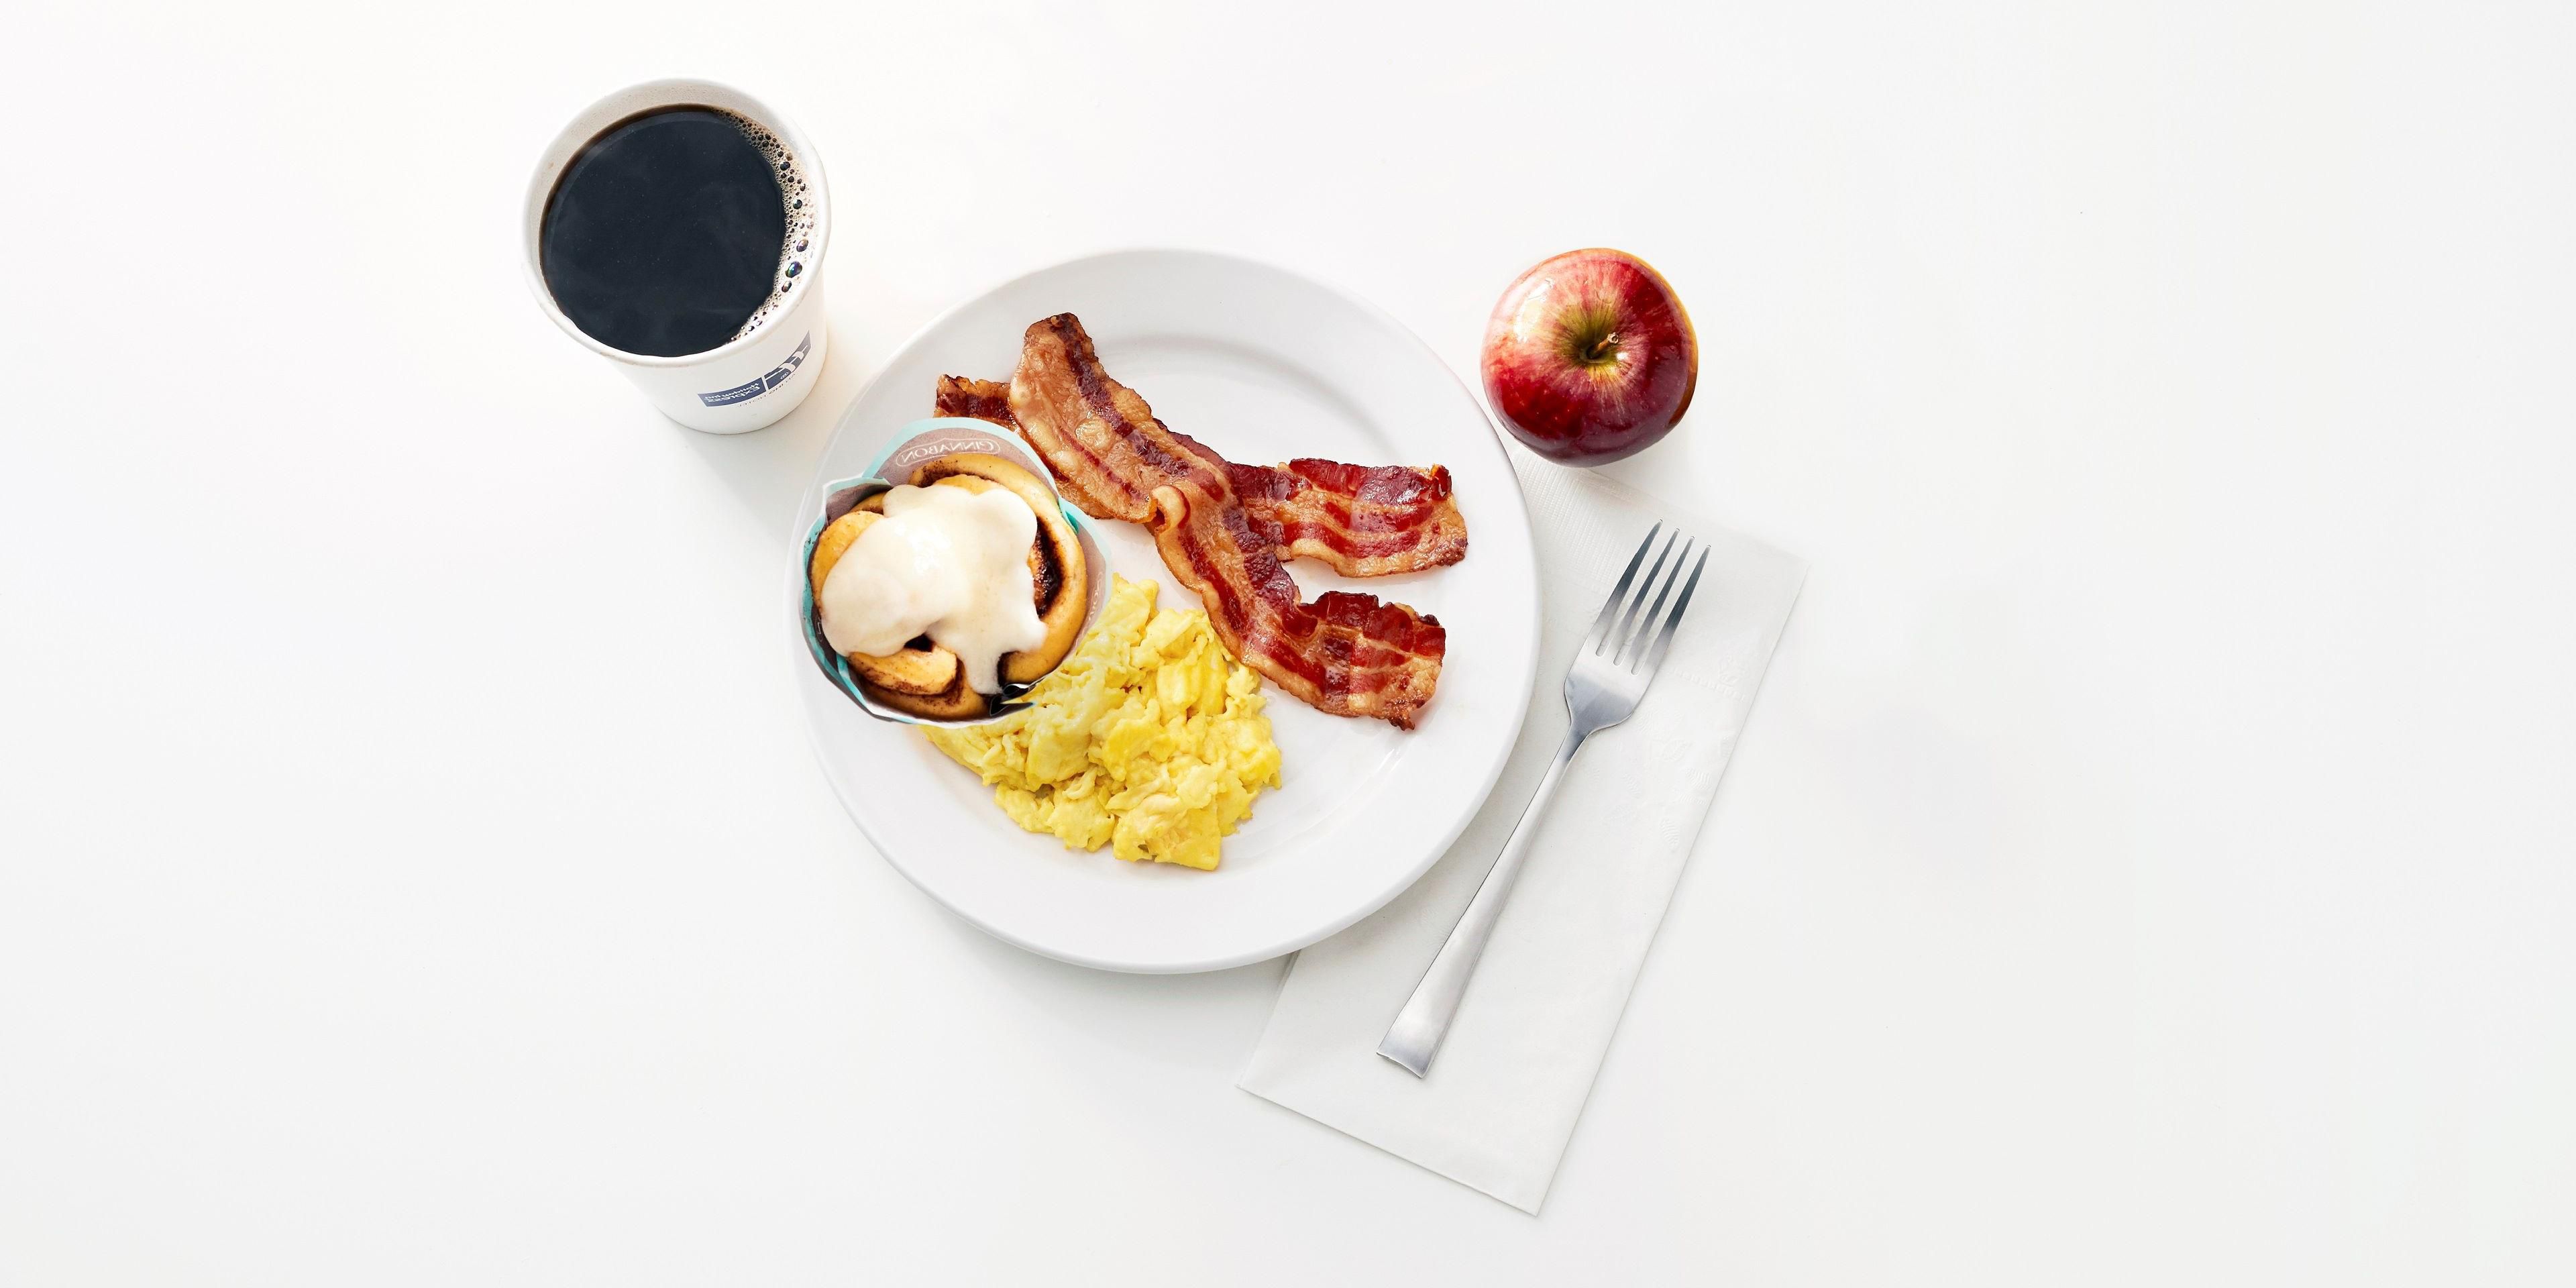 Kick start your day with our Express Start Breakfast, with grab ‘n’ go options and favorites such as eggs and bacon, hot pancakes, our signature cinnamon rolls and fresh coffee.